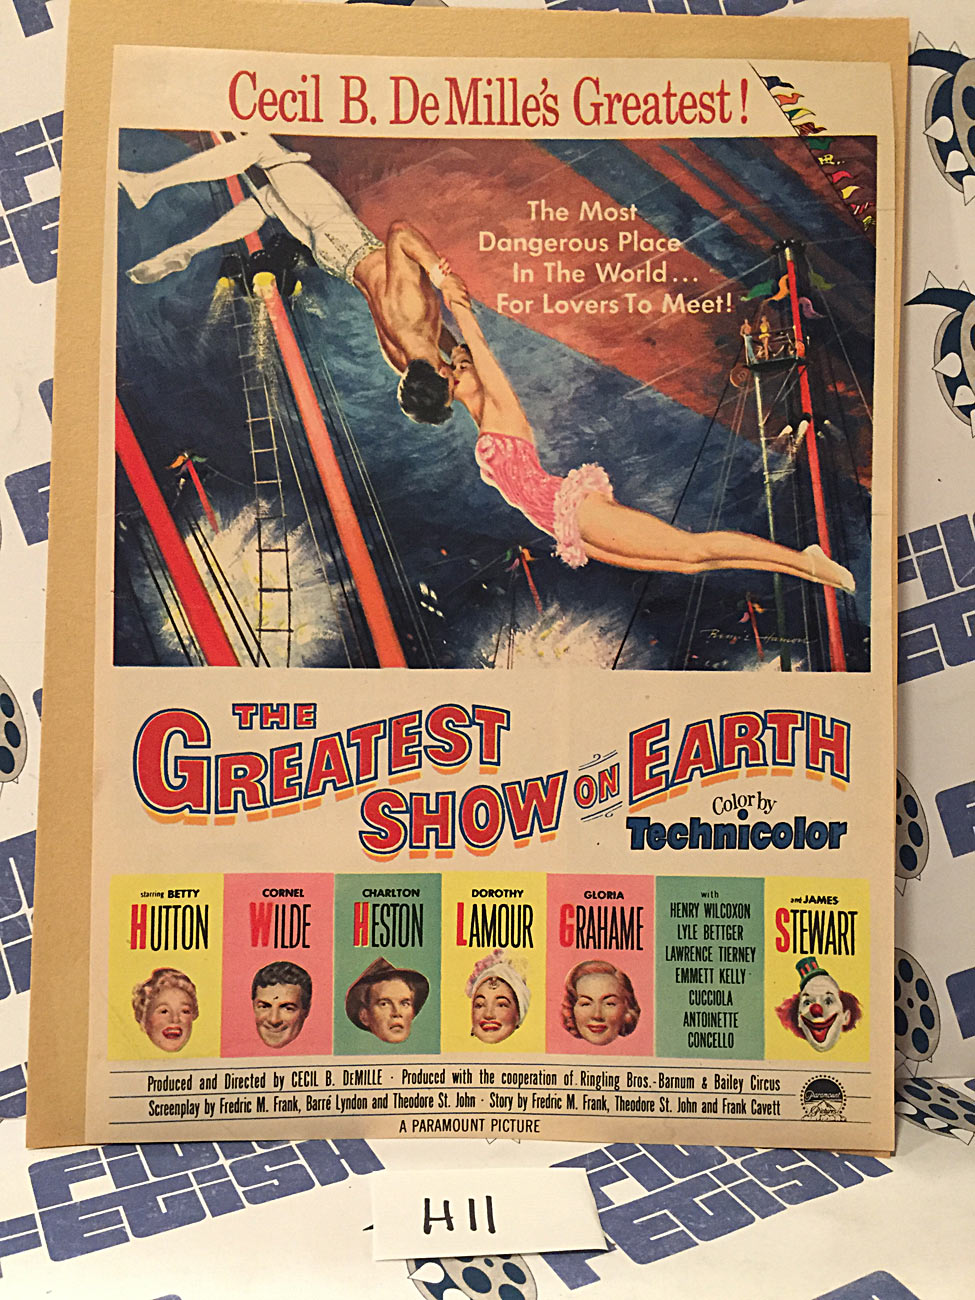 Cecil B. DeMille’s The Greatest Show on Earth (1952) Original Full-Page Magazine Advertisement, James Stewart, Charlton Heston [H11]